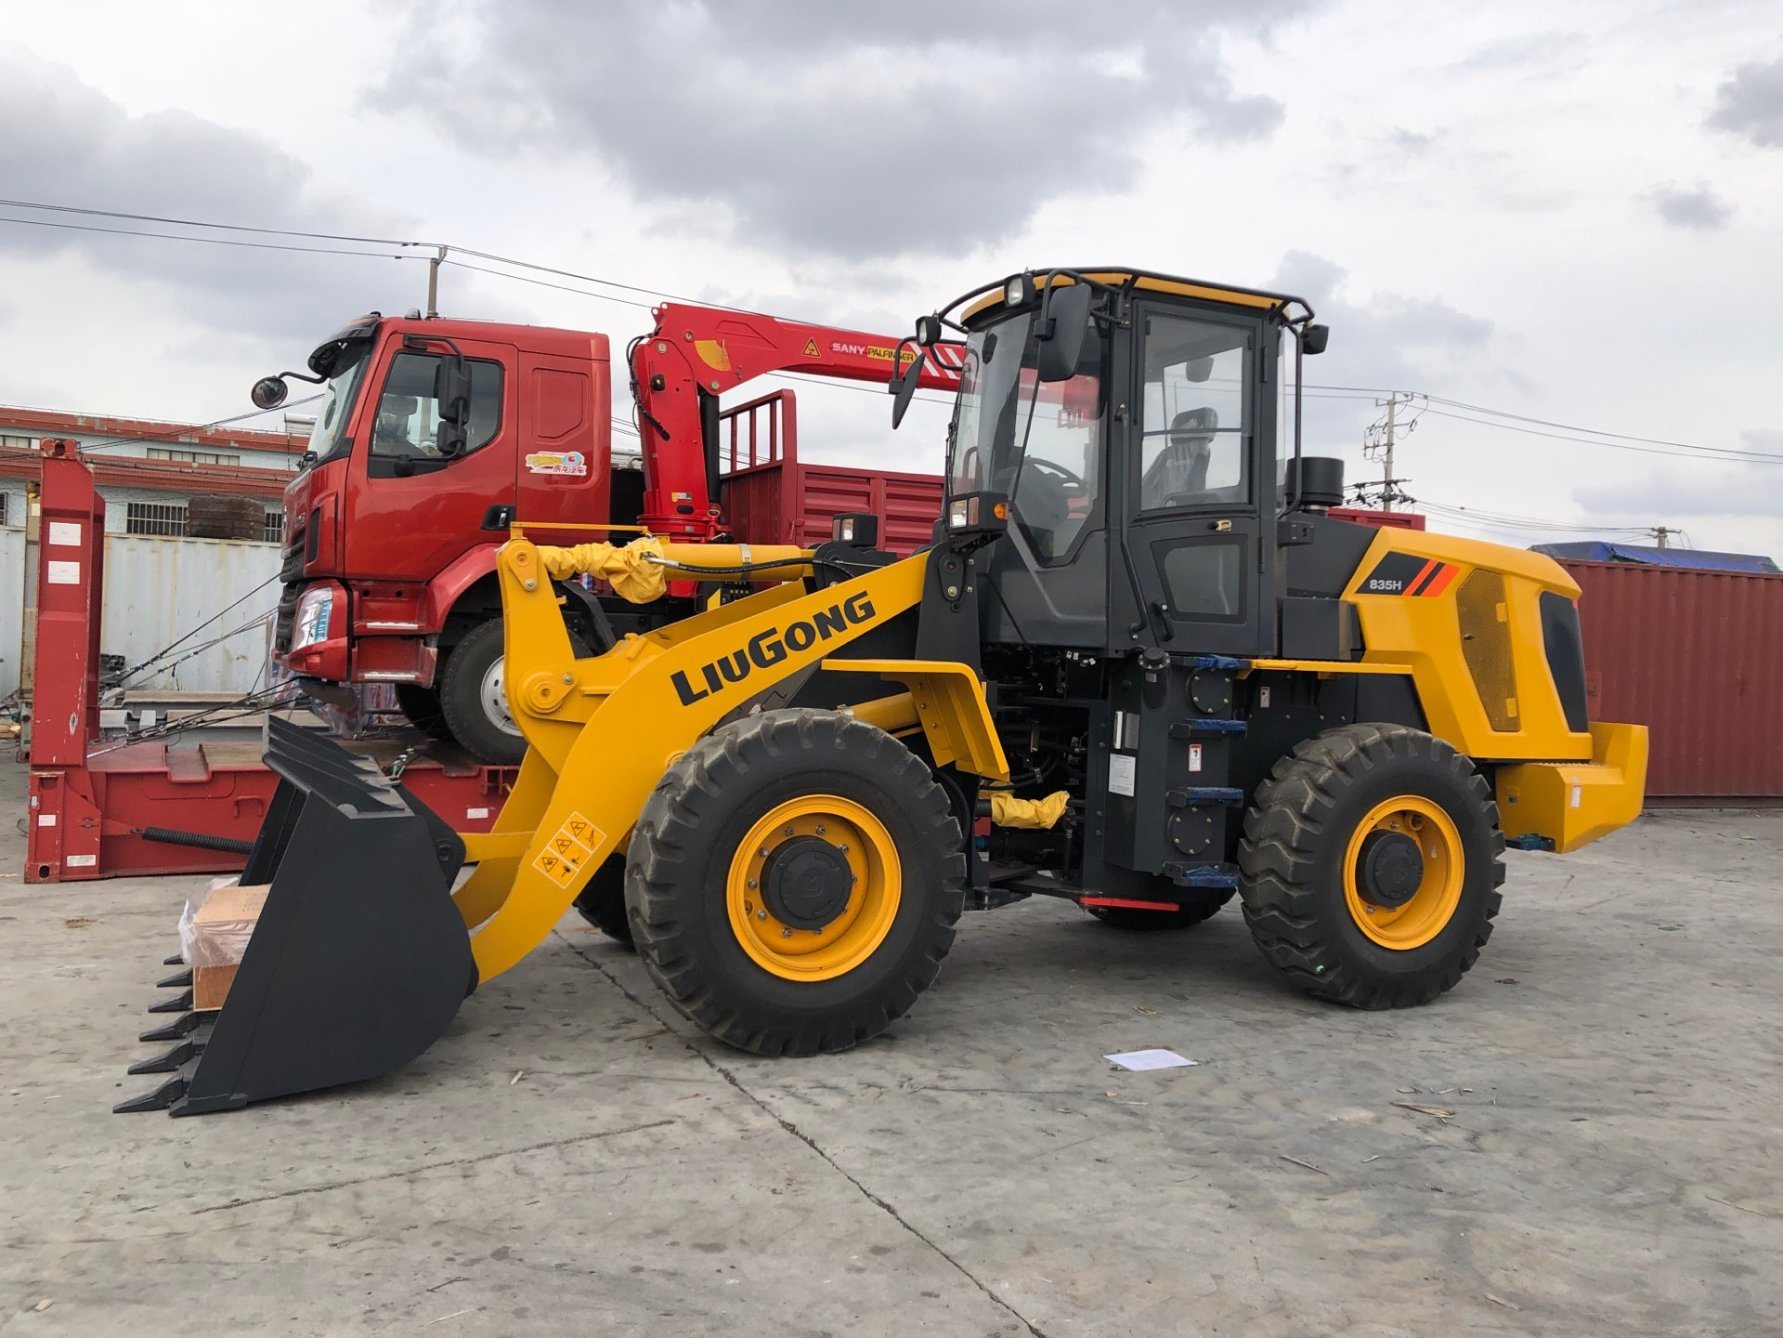 Liugong 3 Ton Rated Load Mini Wheel Loader 835h with EU Stage IV